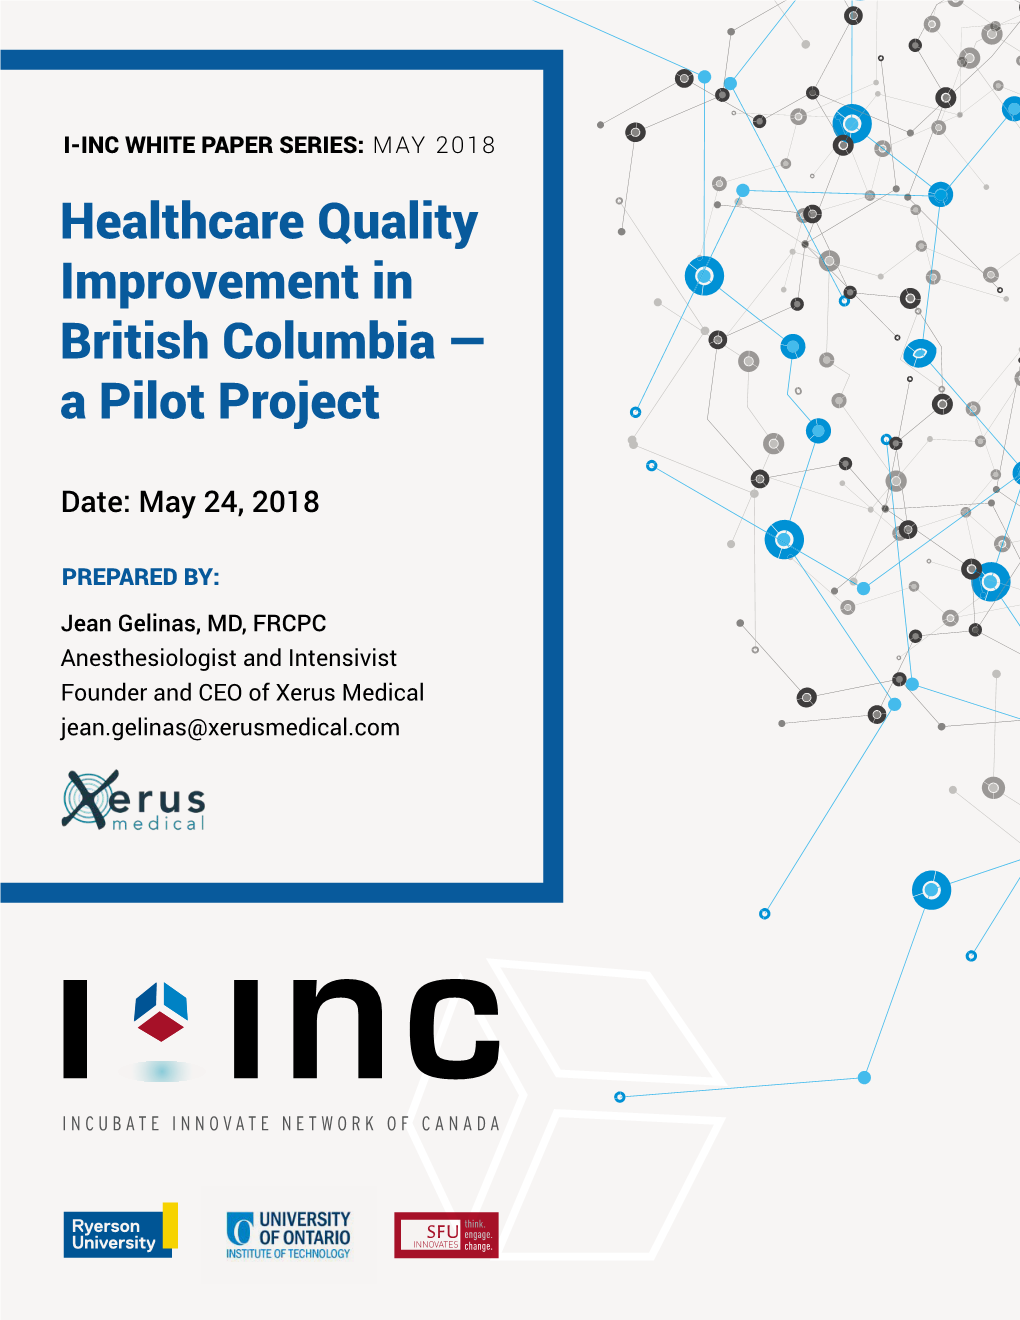 Healthcare Quality Improvement in British Columbia — a Pilot Project